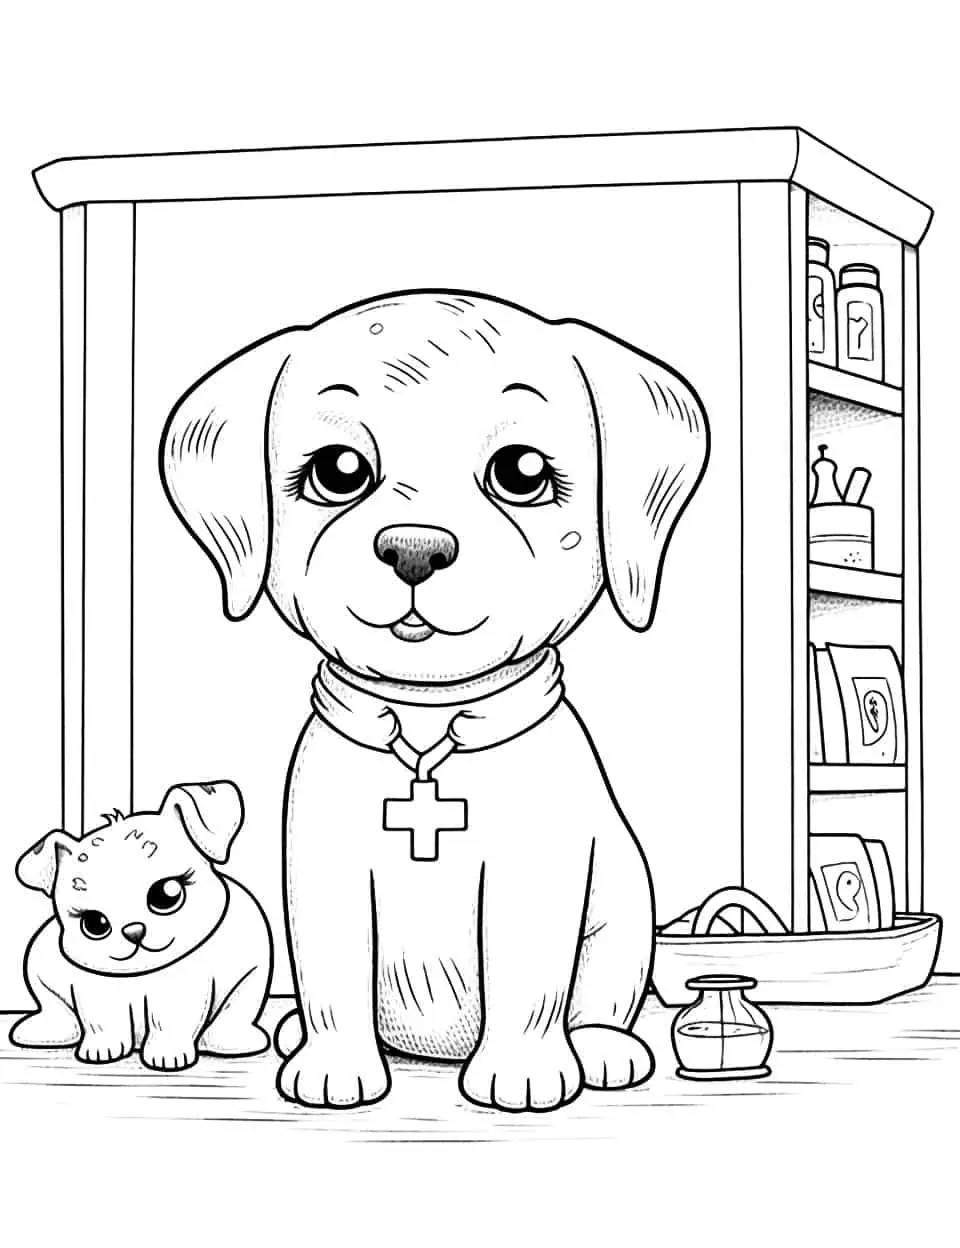 Pet Parlor Coloring Page - A Poodle, a Yorkie, and a Siamese cat having a spa day at a pet parlor.